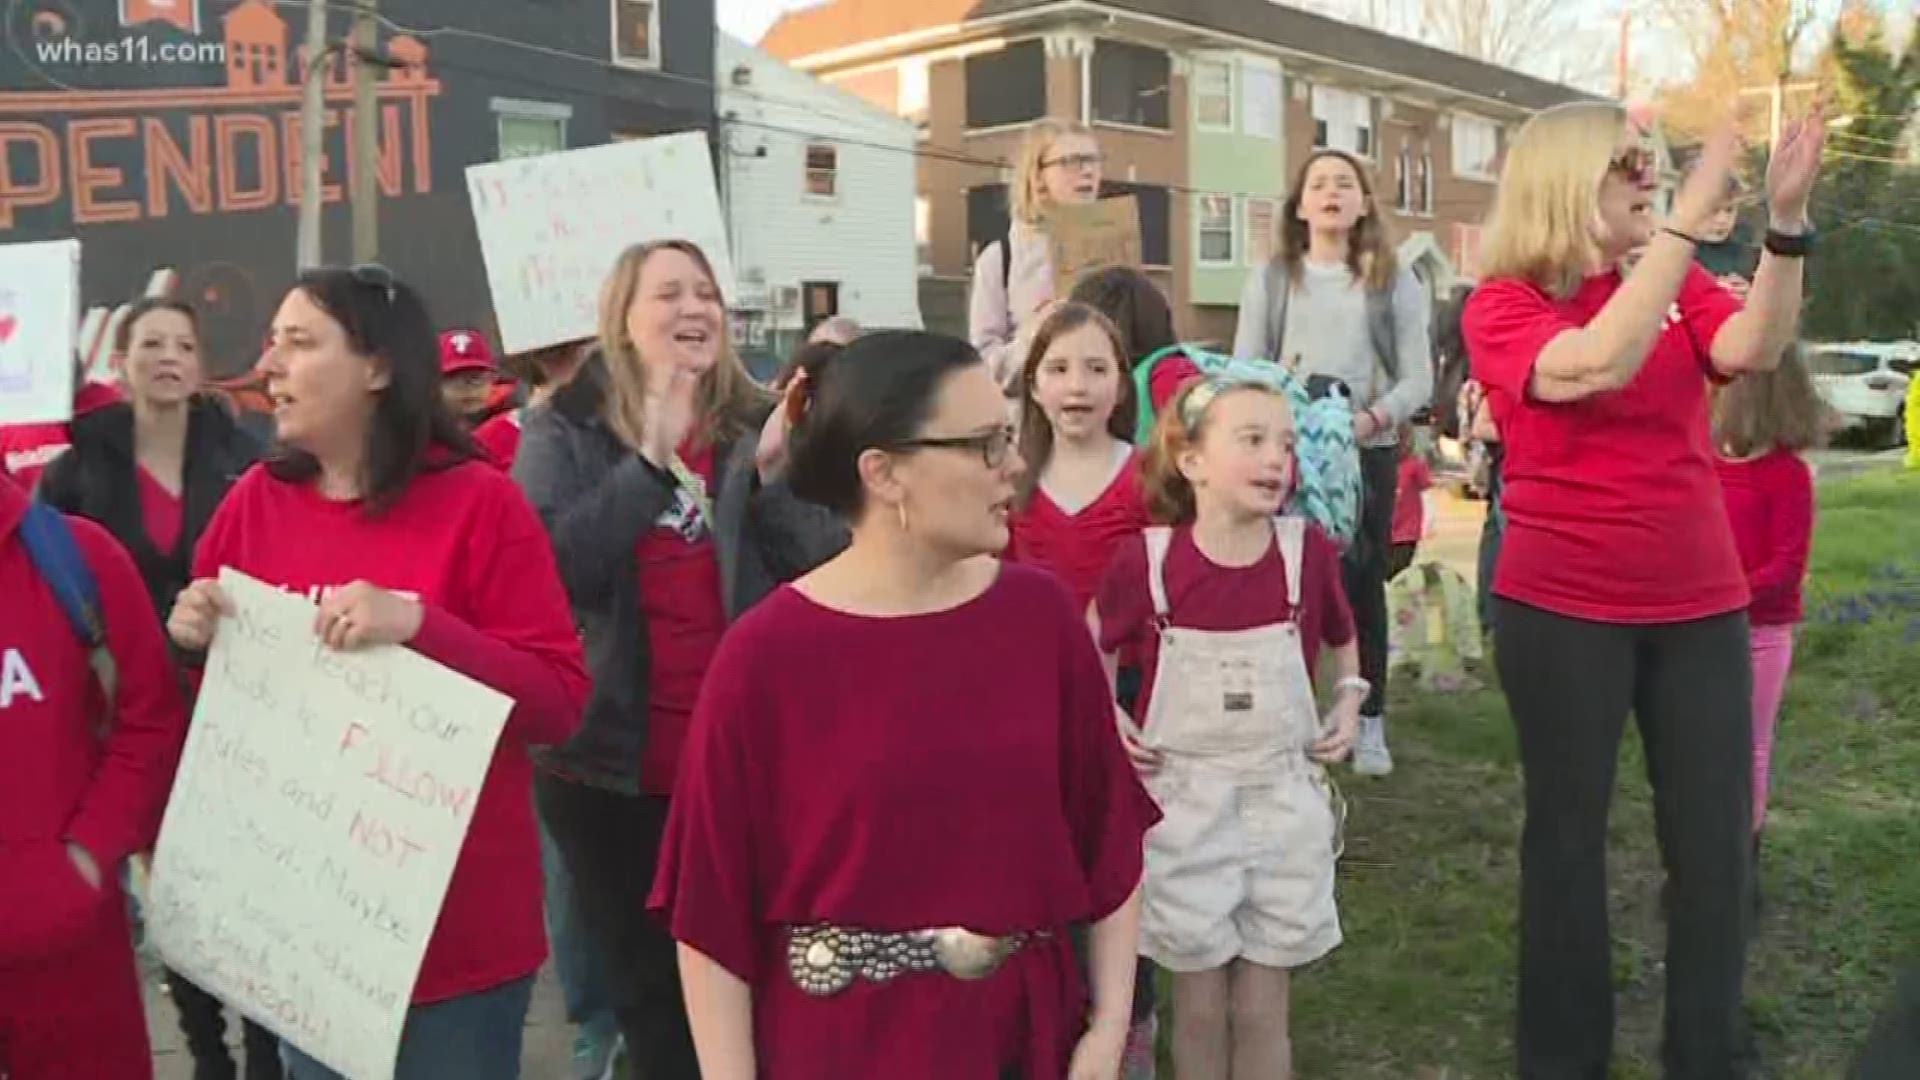 Schools across Louisville held walk-ins to protest cuts to education funding.